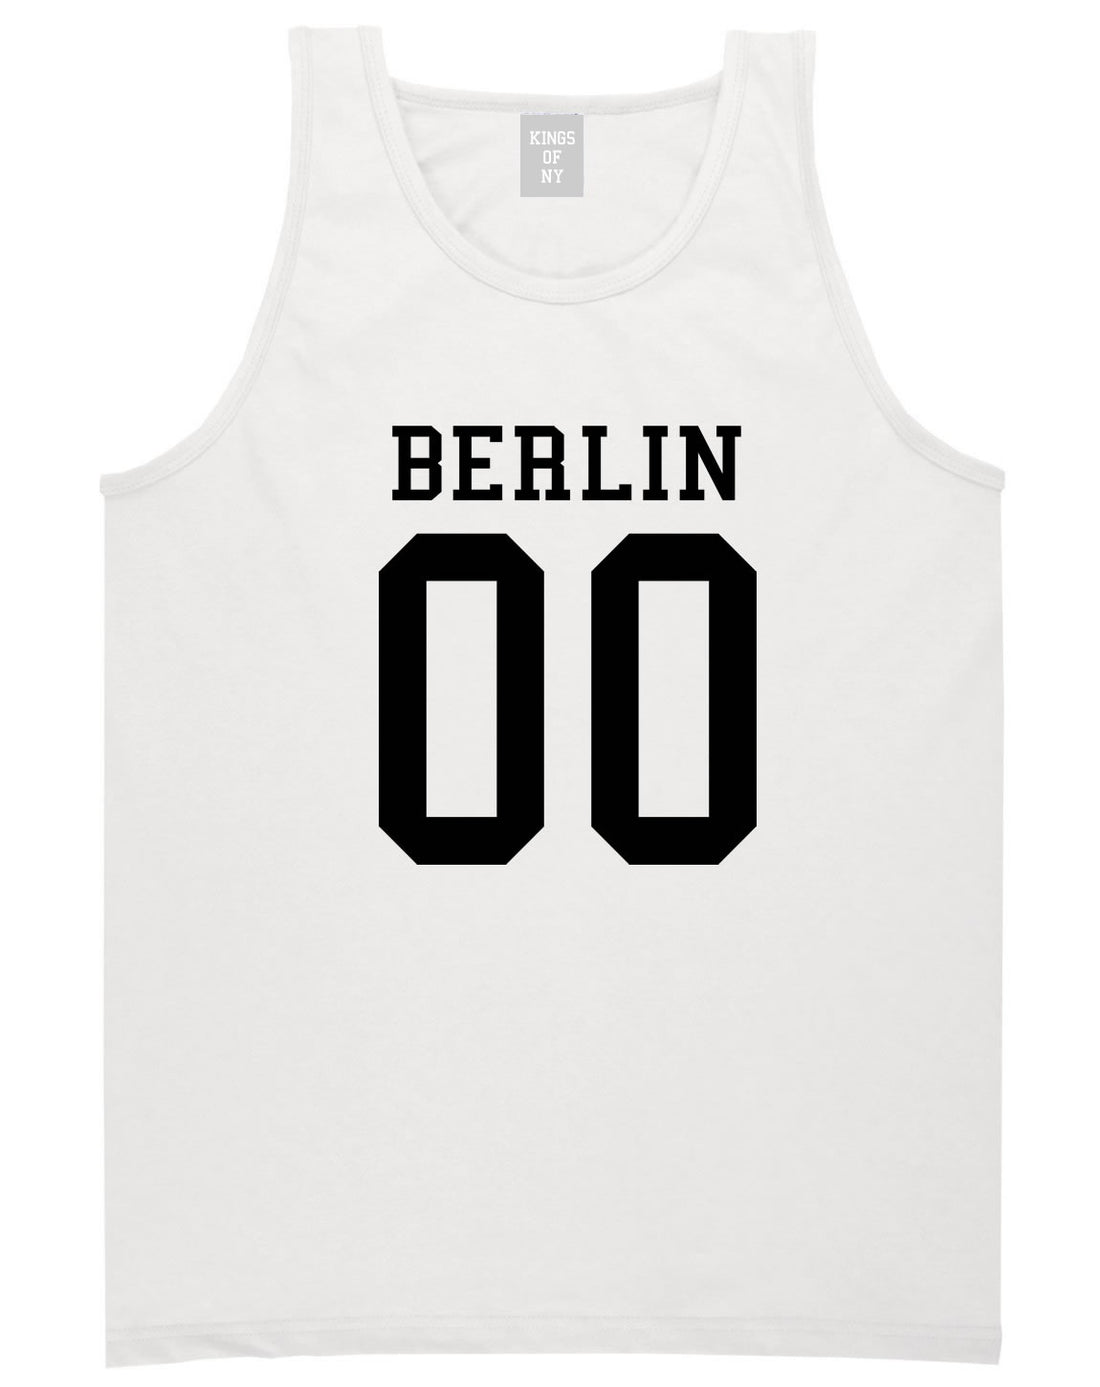 Berlin Team Jersey Germany Country Tank Top in White By Kings Of NY